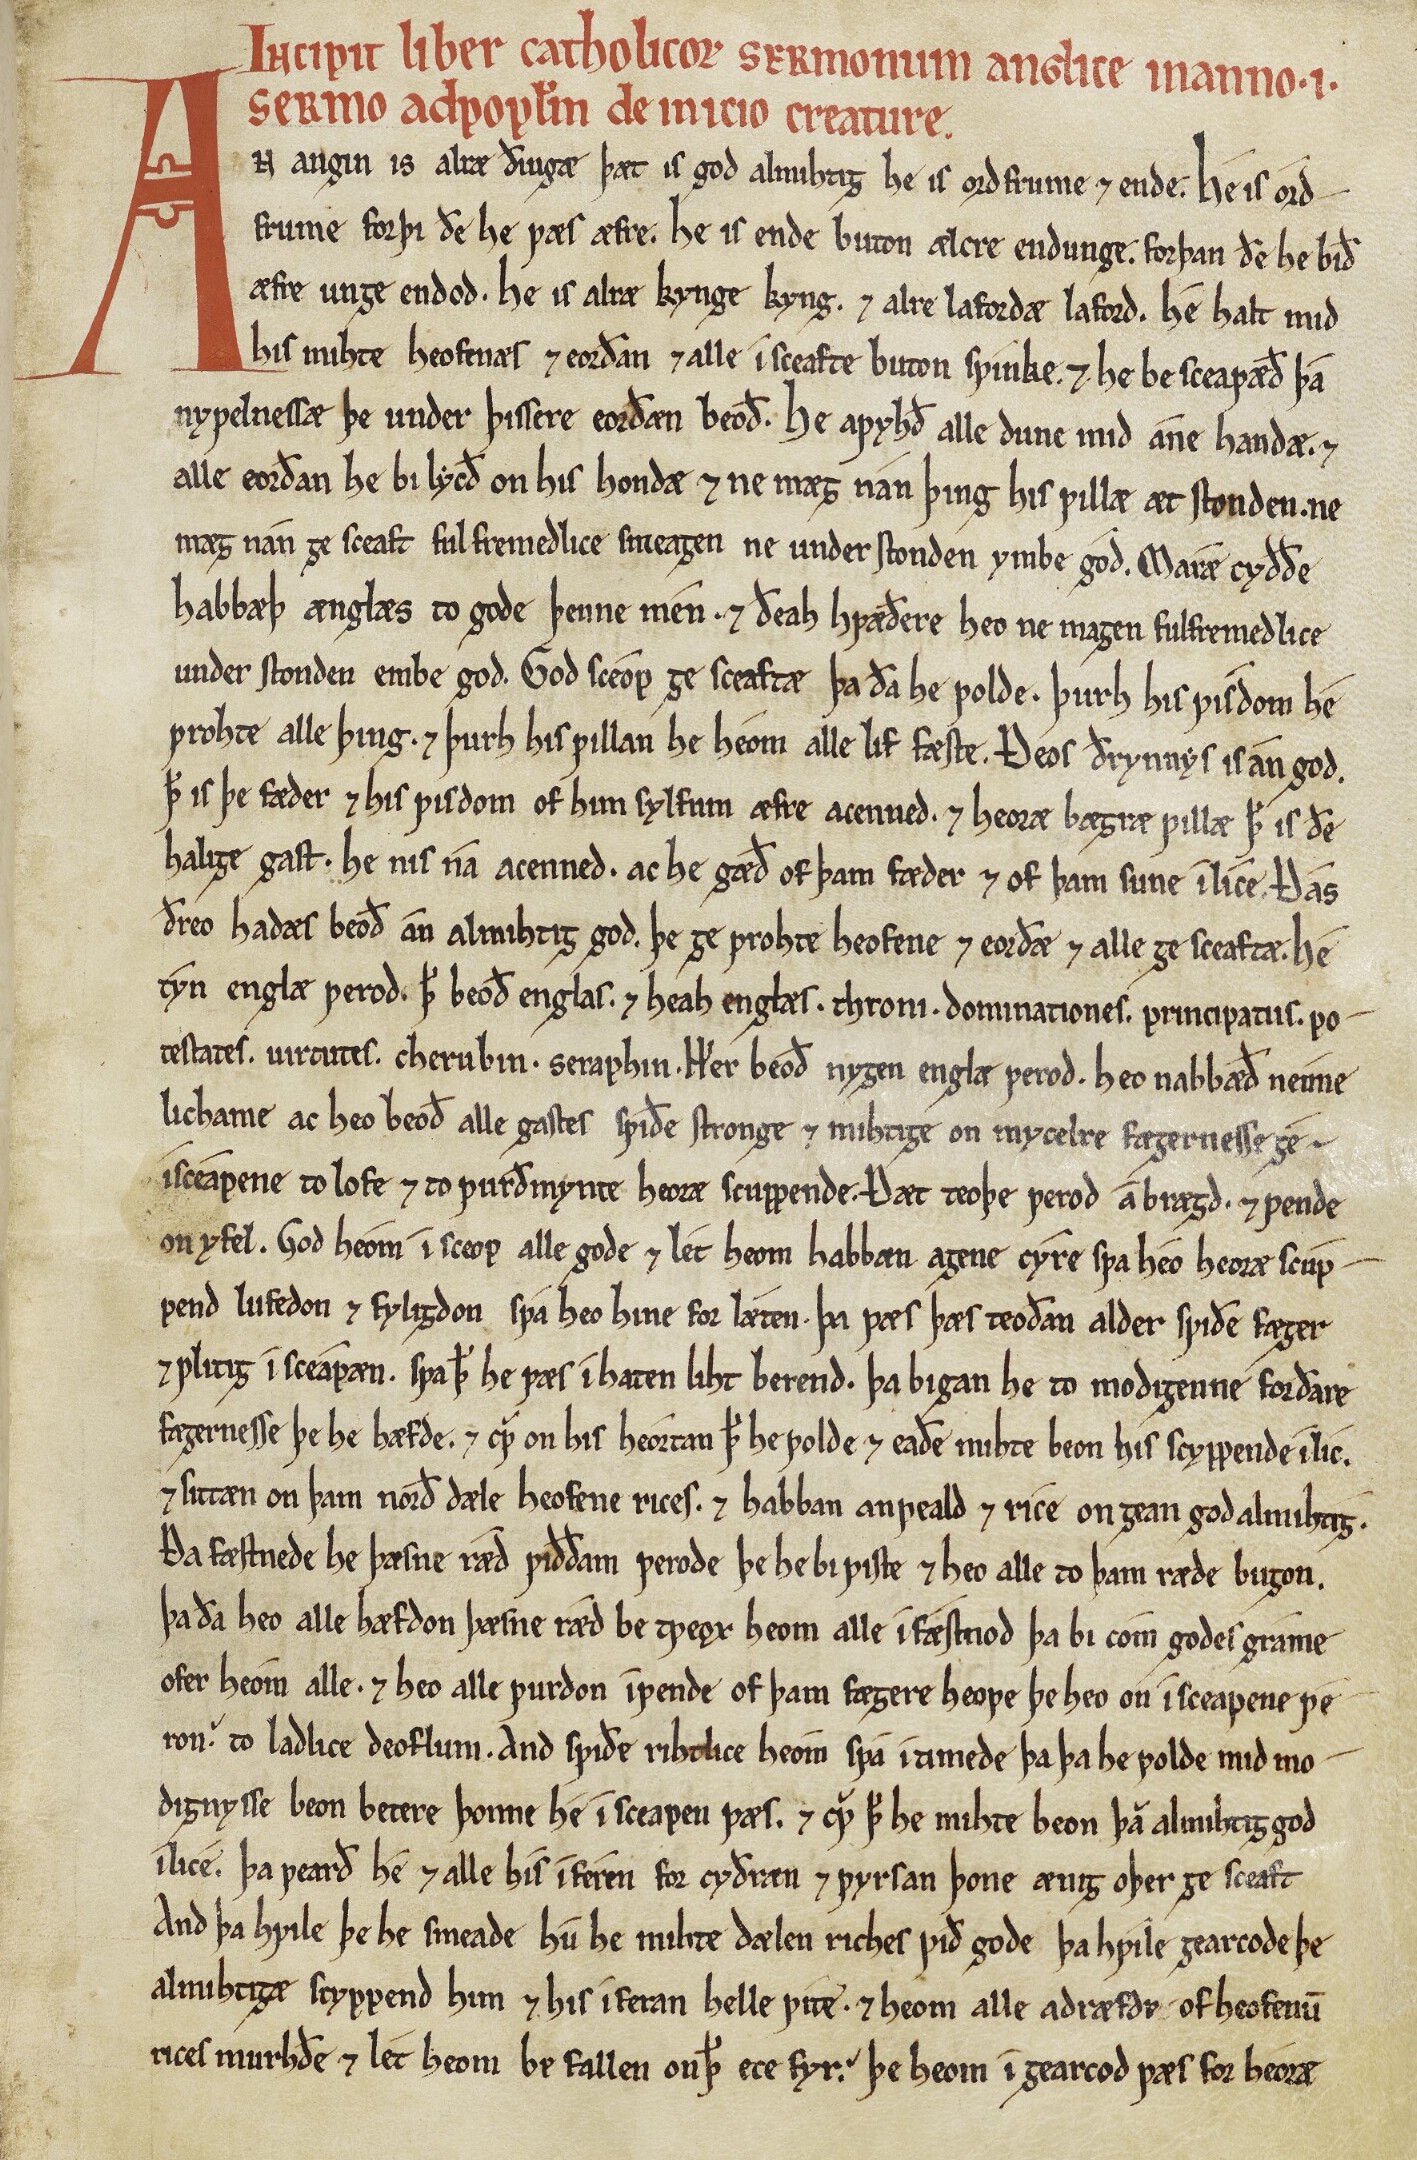 This yellowed manuscript folio contains the Old English text of Ælfric's homily "De Initio Creaturae" ("On the Begining of Creation"). Most of the text is black, but the initial capital "A"is about four times larger than the text around it and is inked in red. Along the top of the folio is red text in Latin introducing the homily.